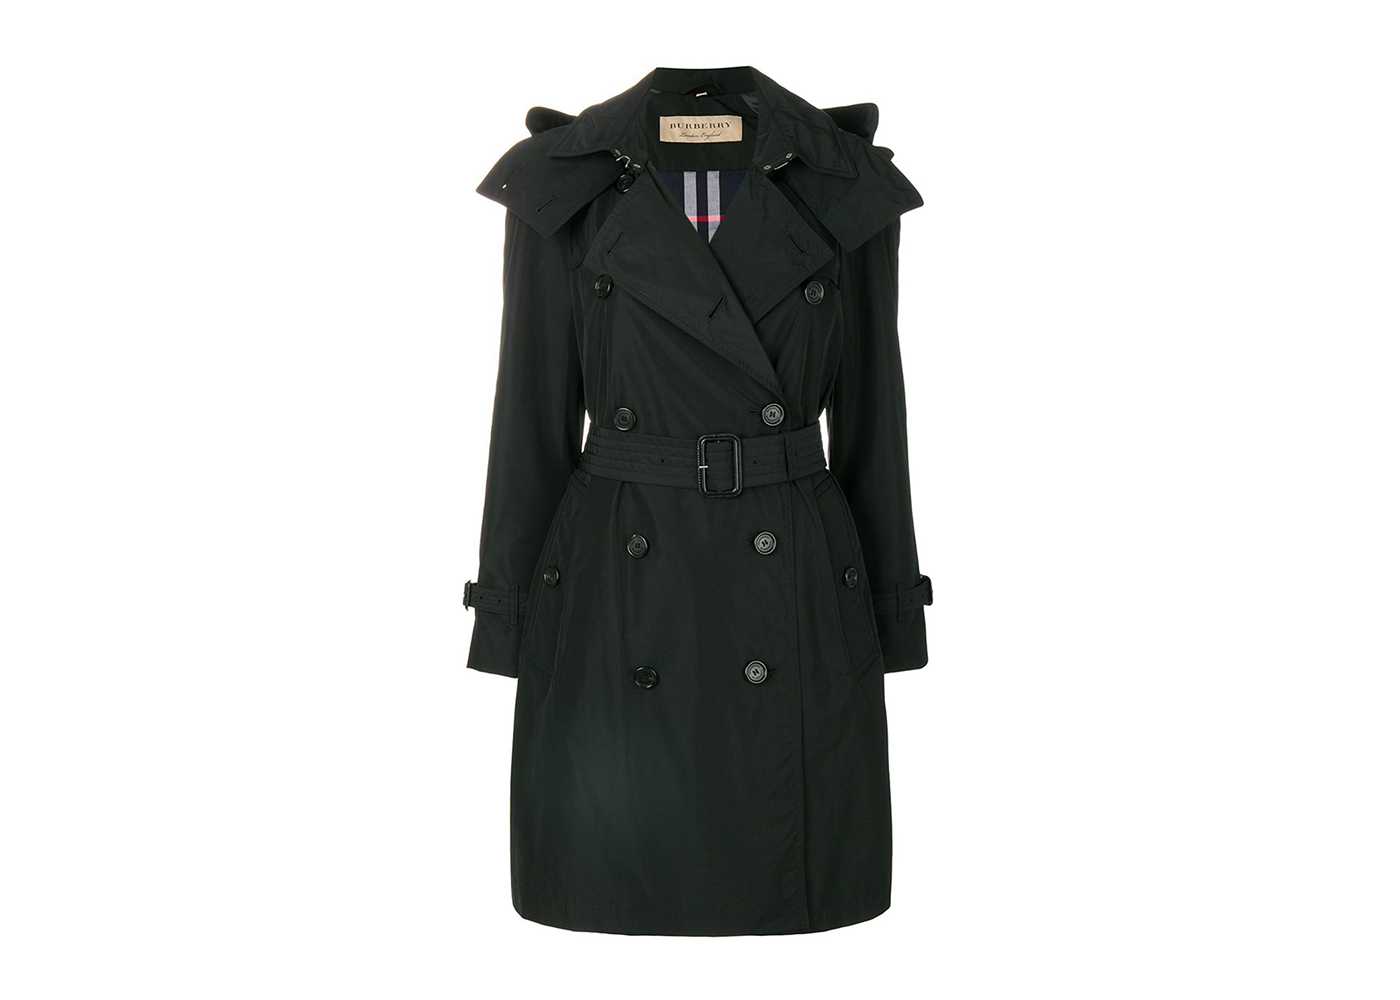 Burberry Women's Amberford Hooded Shell Trench Coat Black - GB